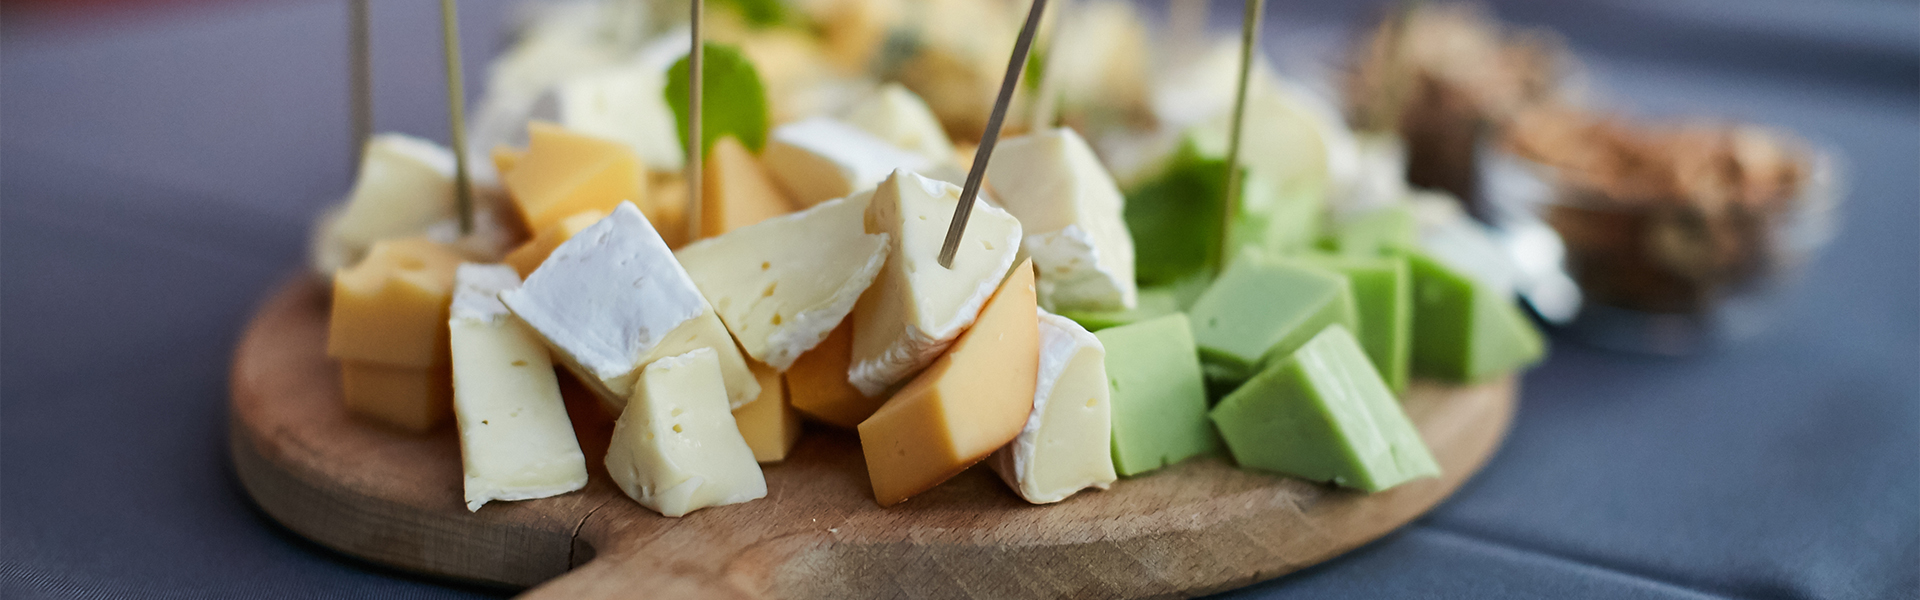 How to take care of softer cheeses